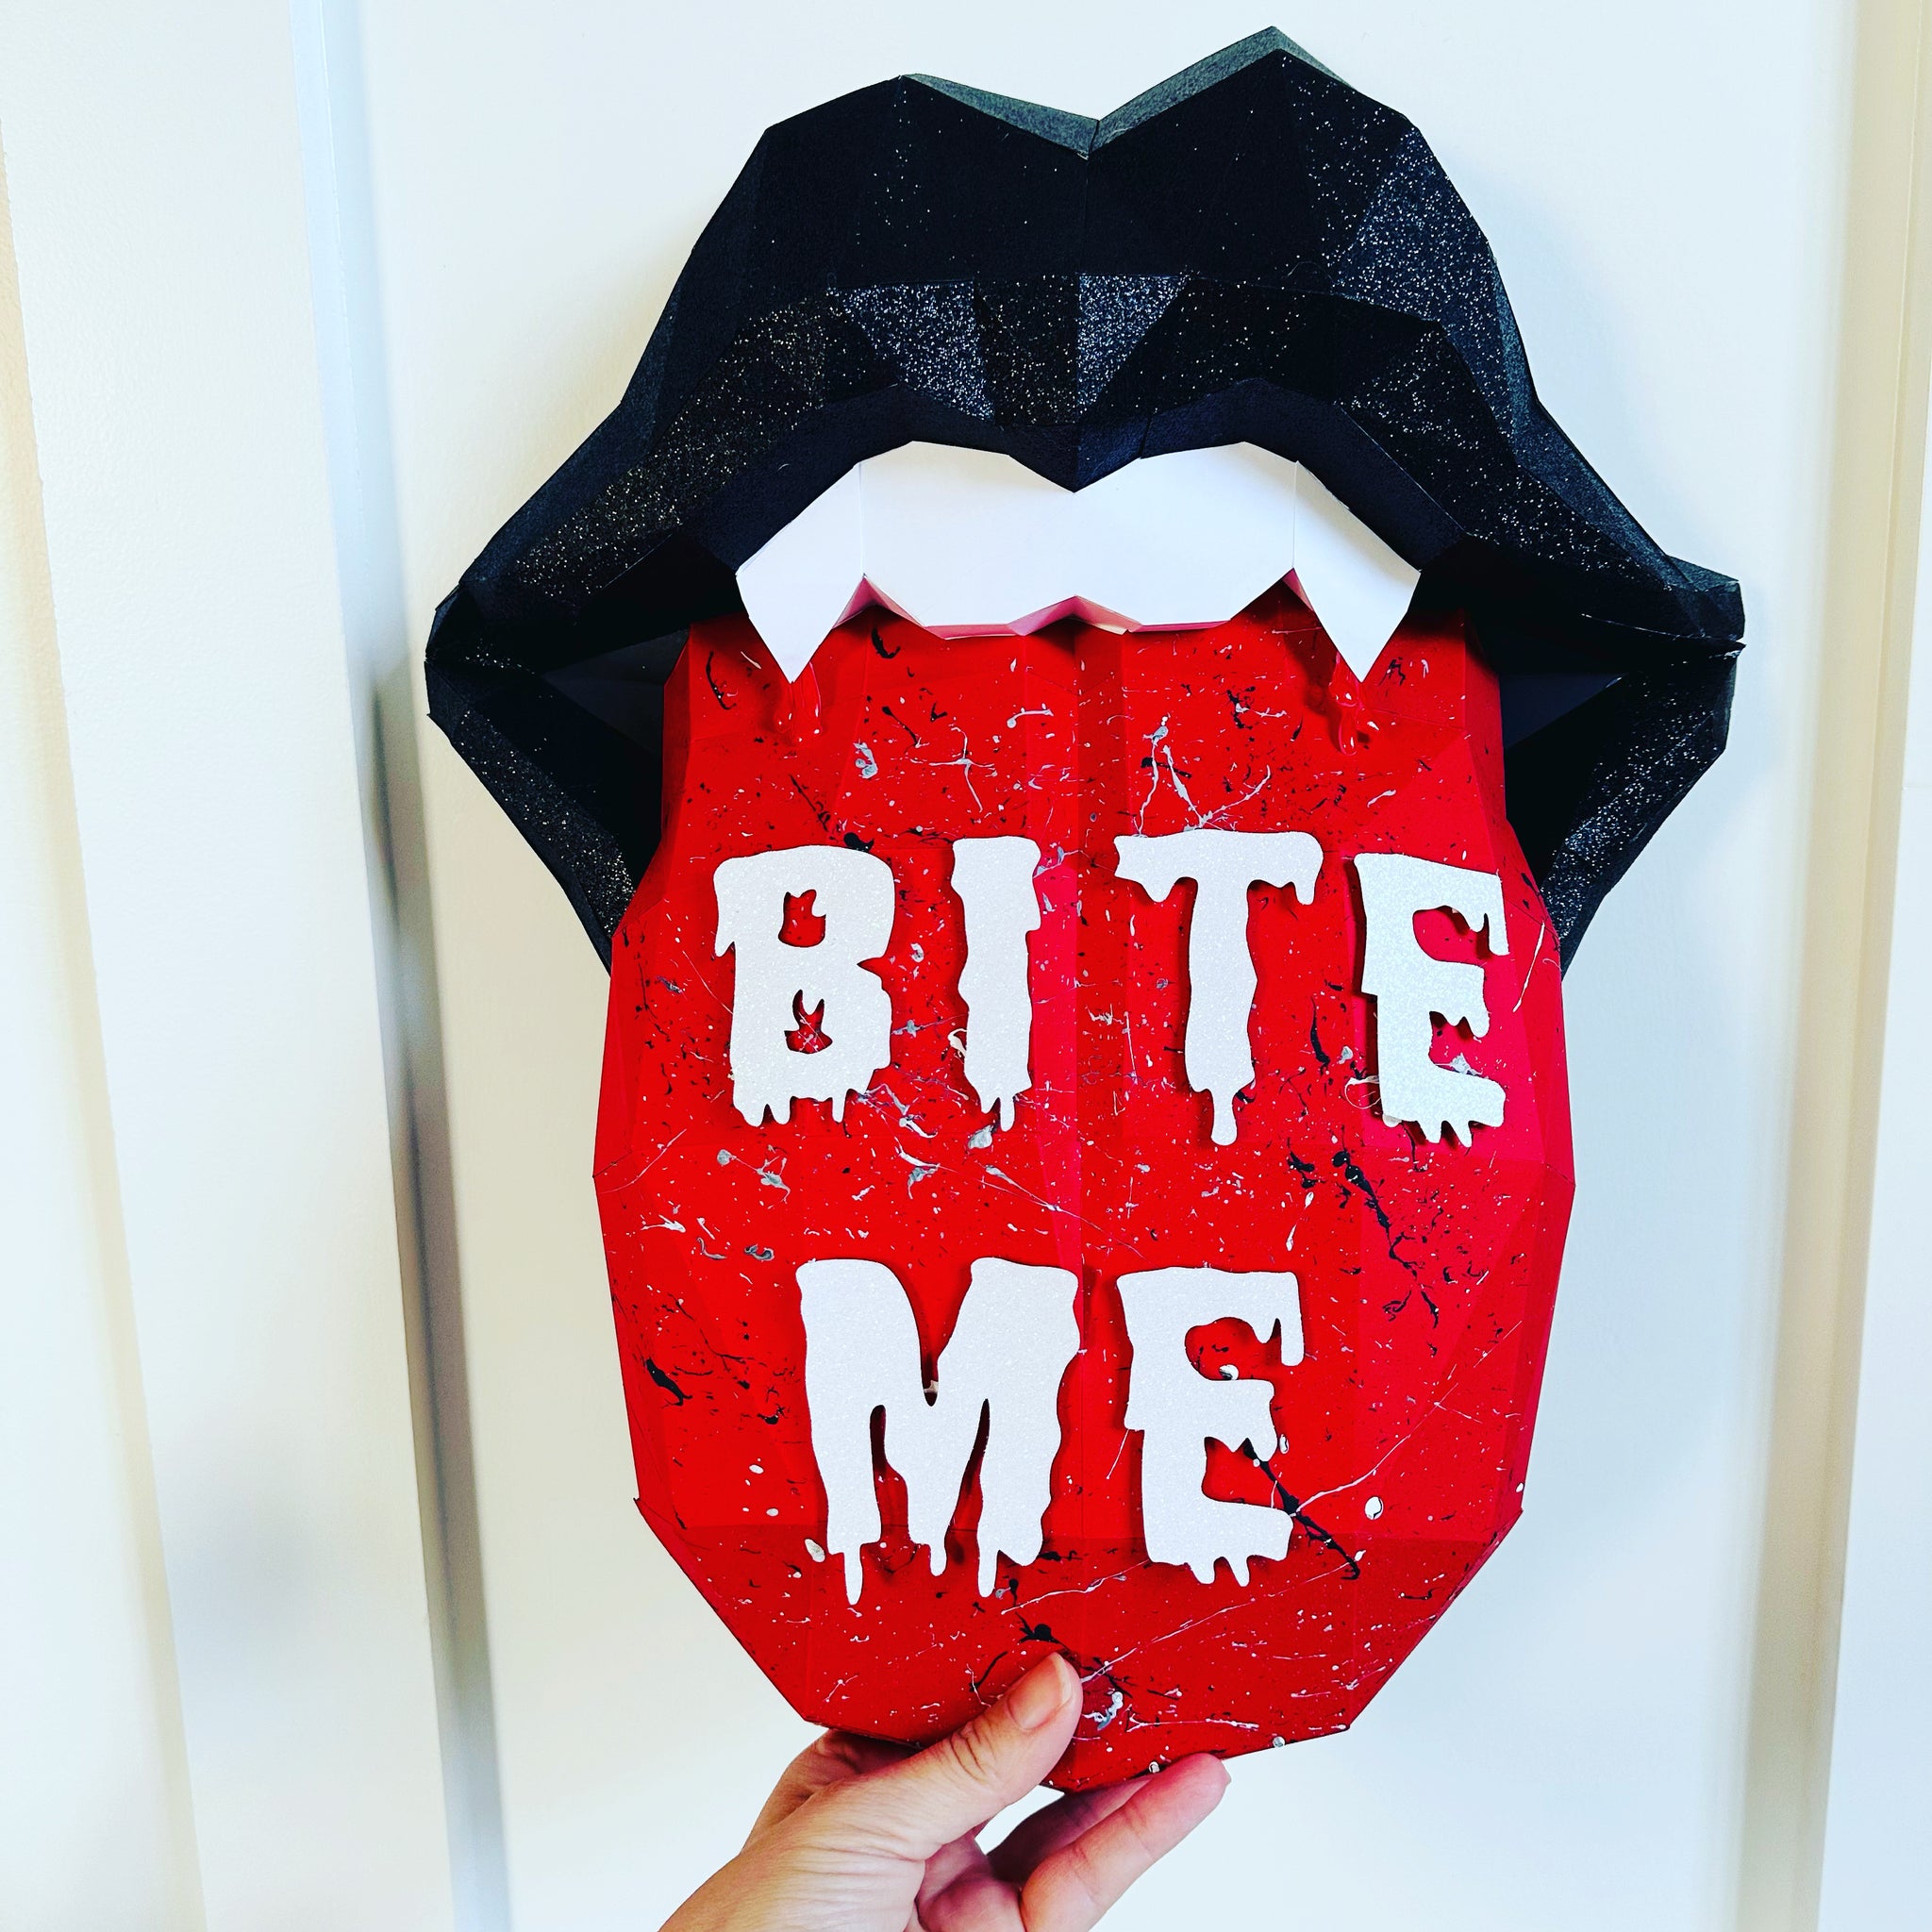 Bite Me tongue Lip art - Pucker Up Lips and Accessories